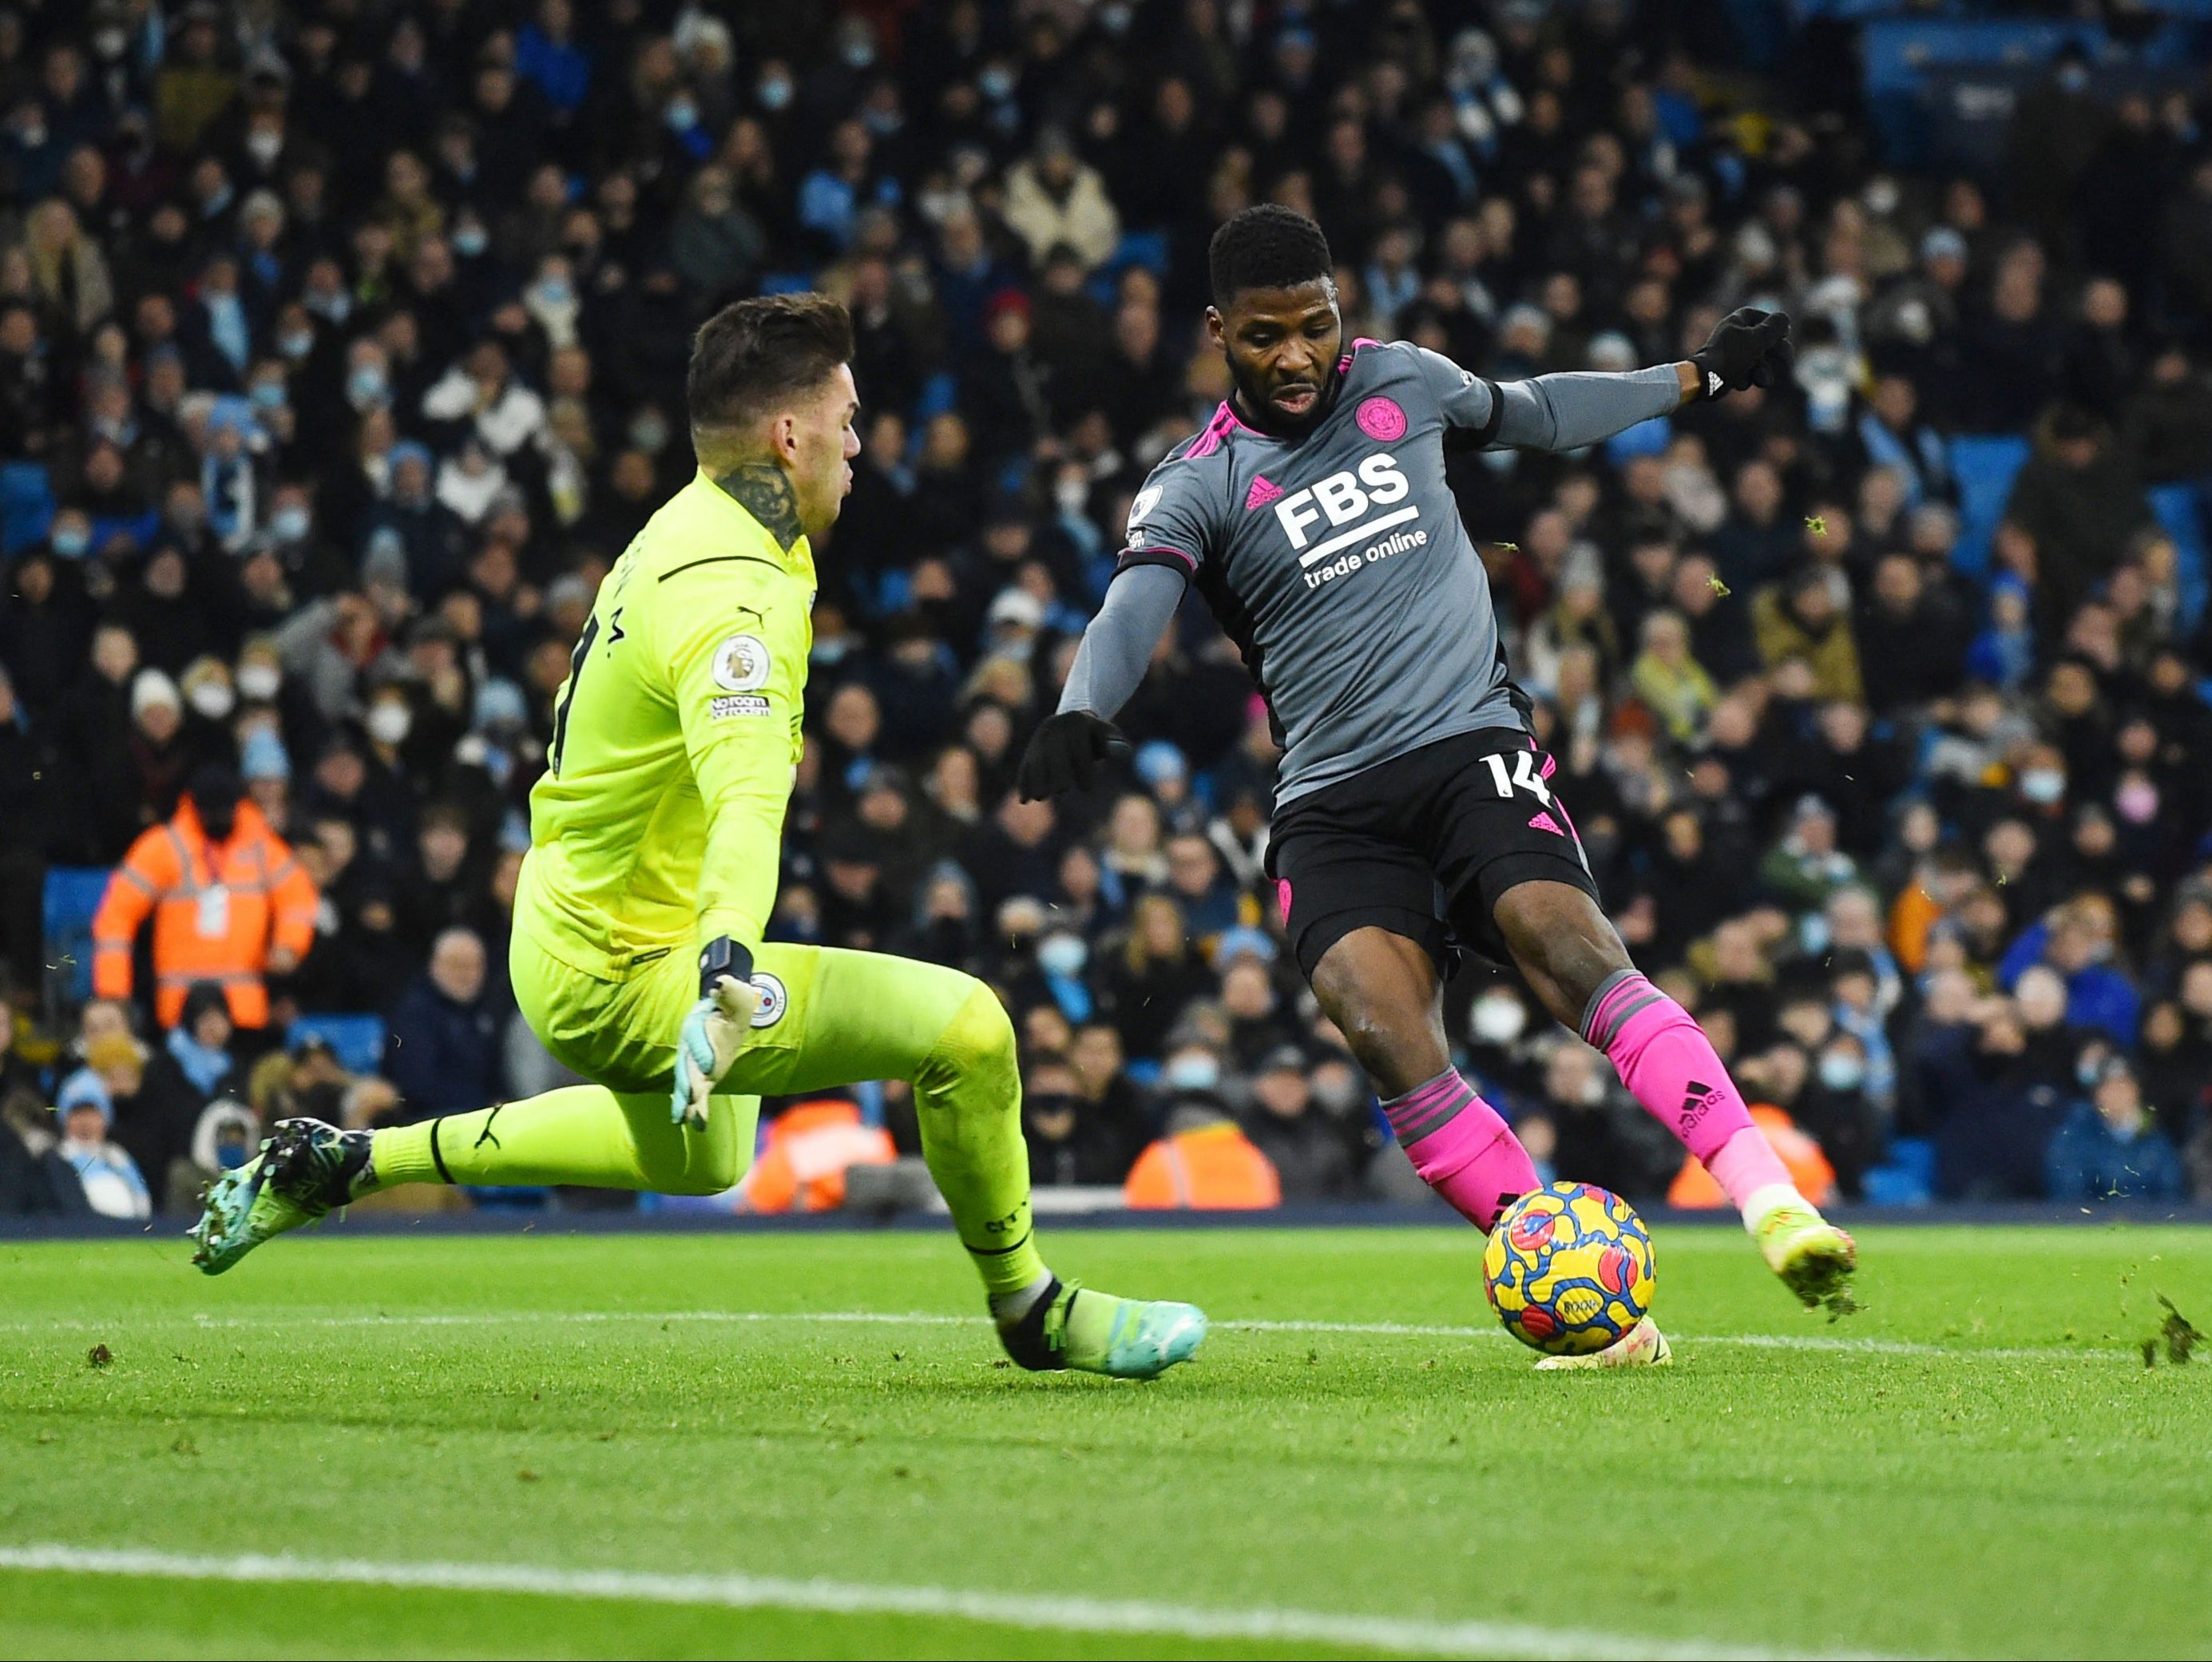 Kelechi Iheanacho scored Leicester’s third in a thrilling second-half spell